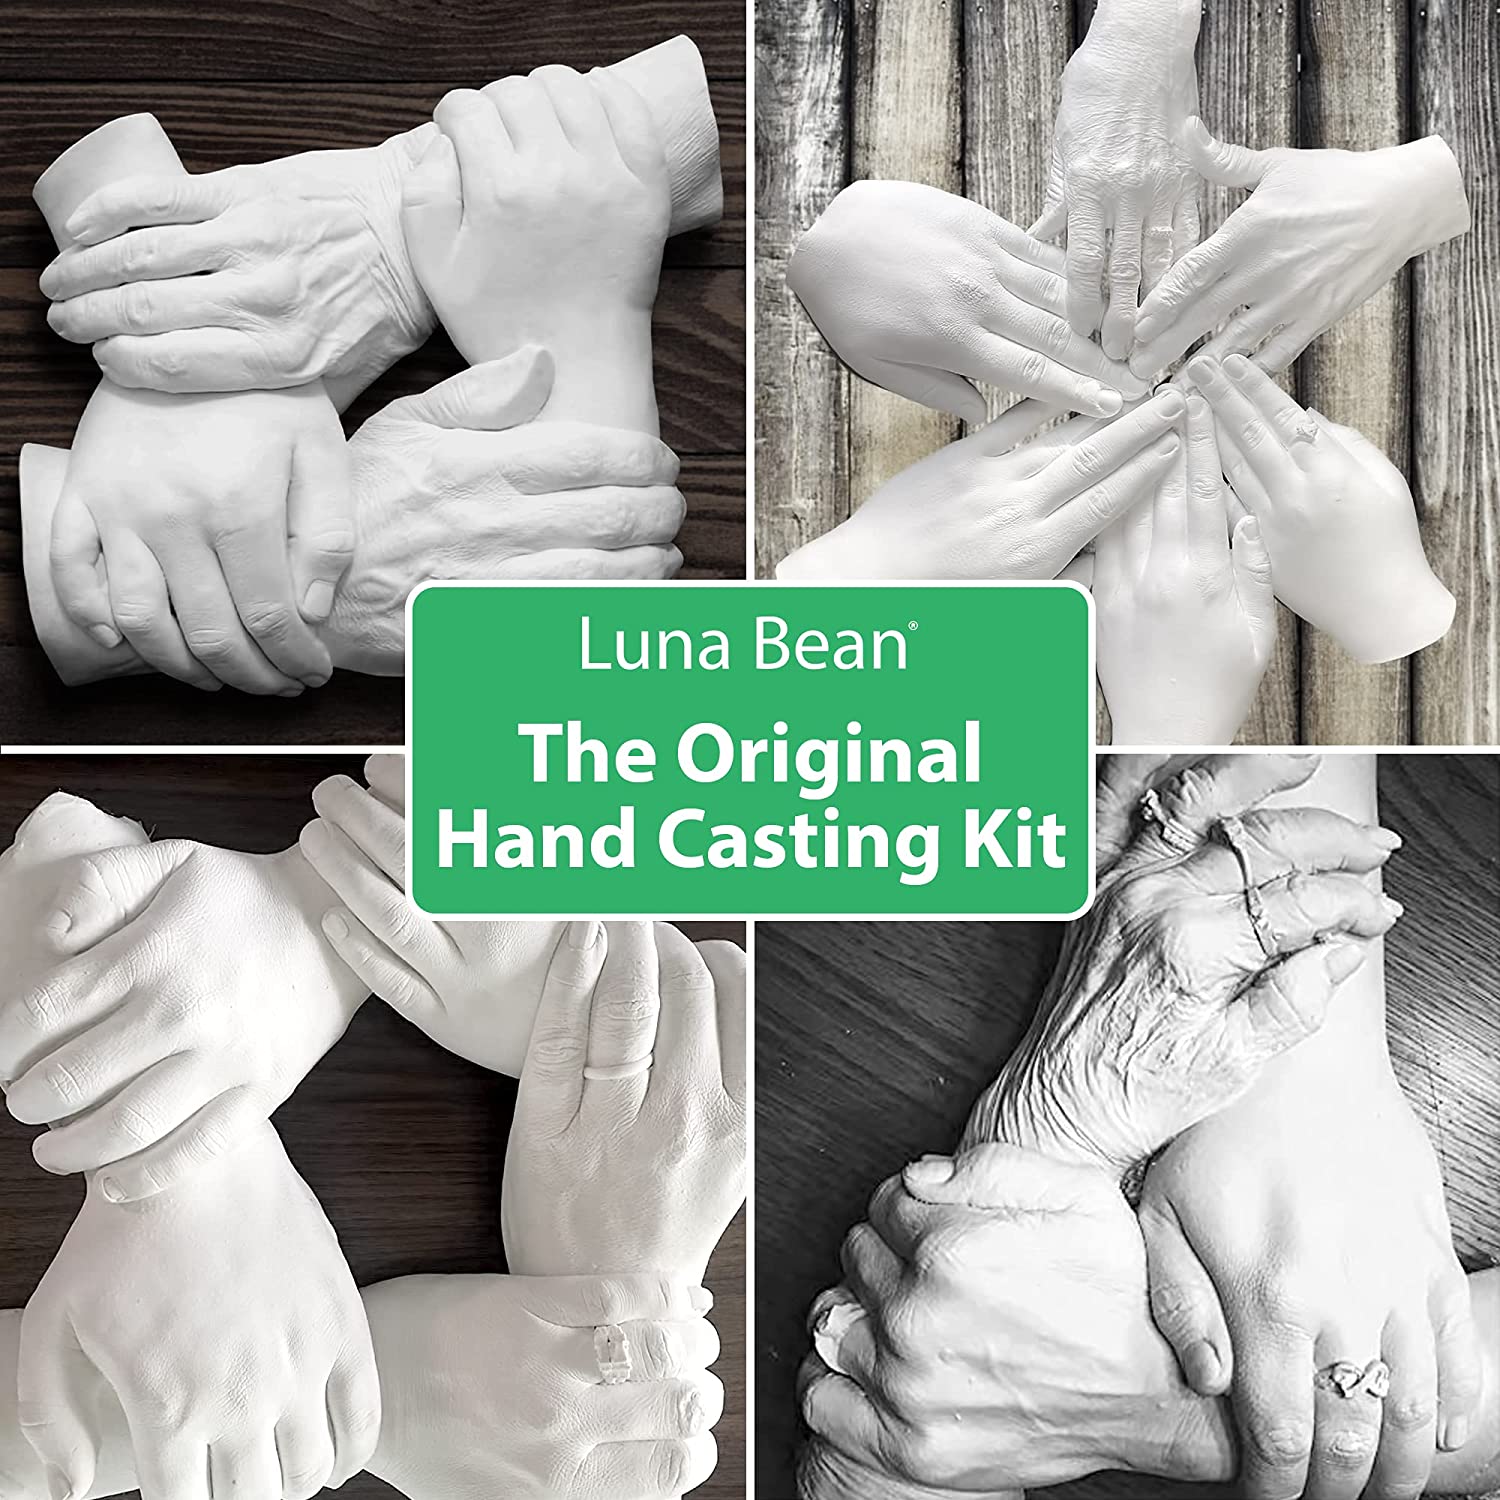 How to Use Plaster Hand Mold DIY Hand Casting Kit Life Casting